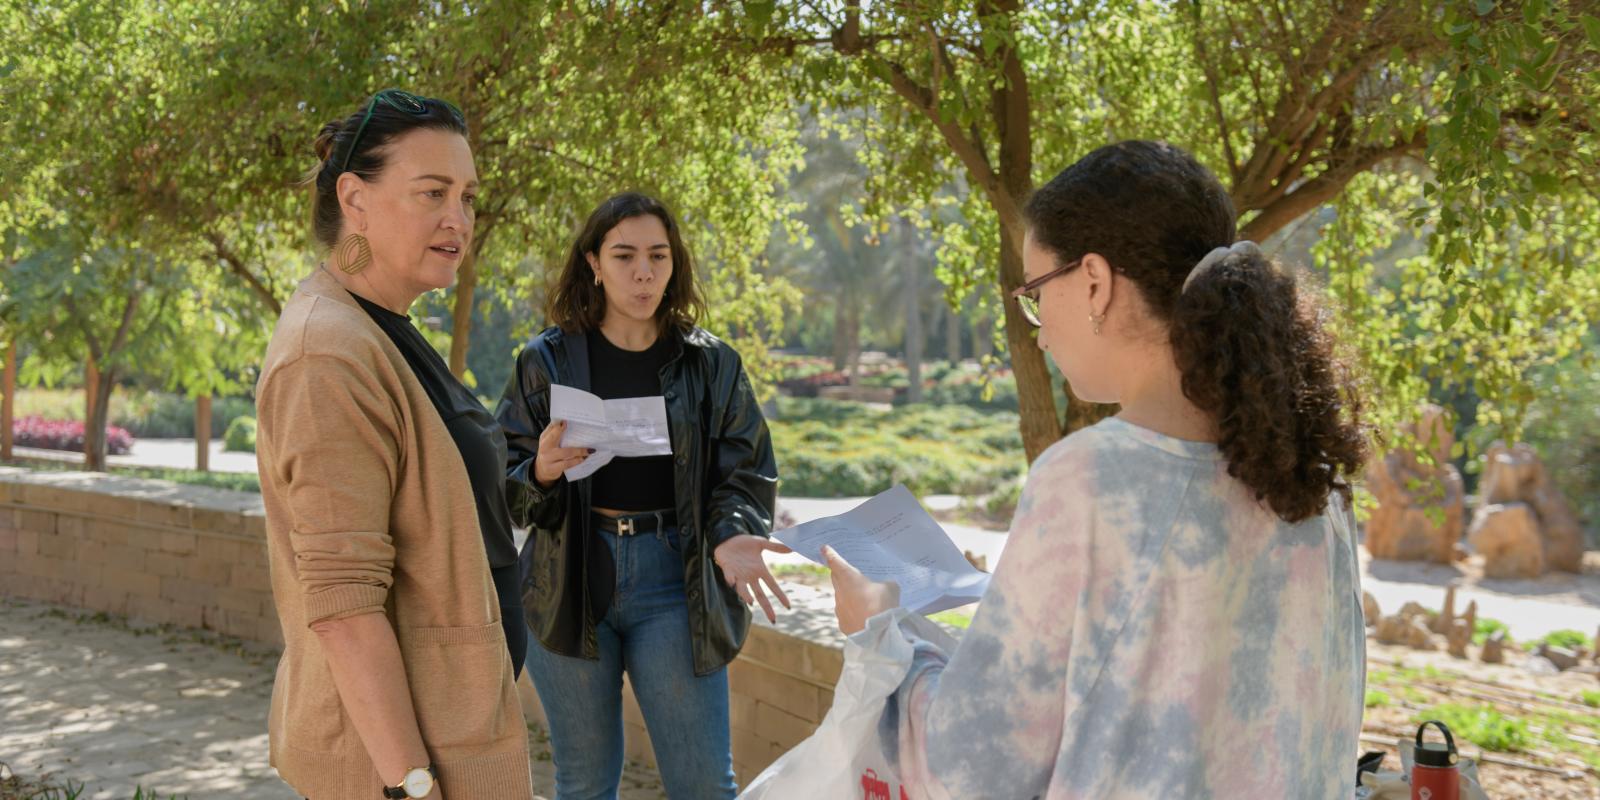 A woman in a brown jacket works with students with scripts outdoors